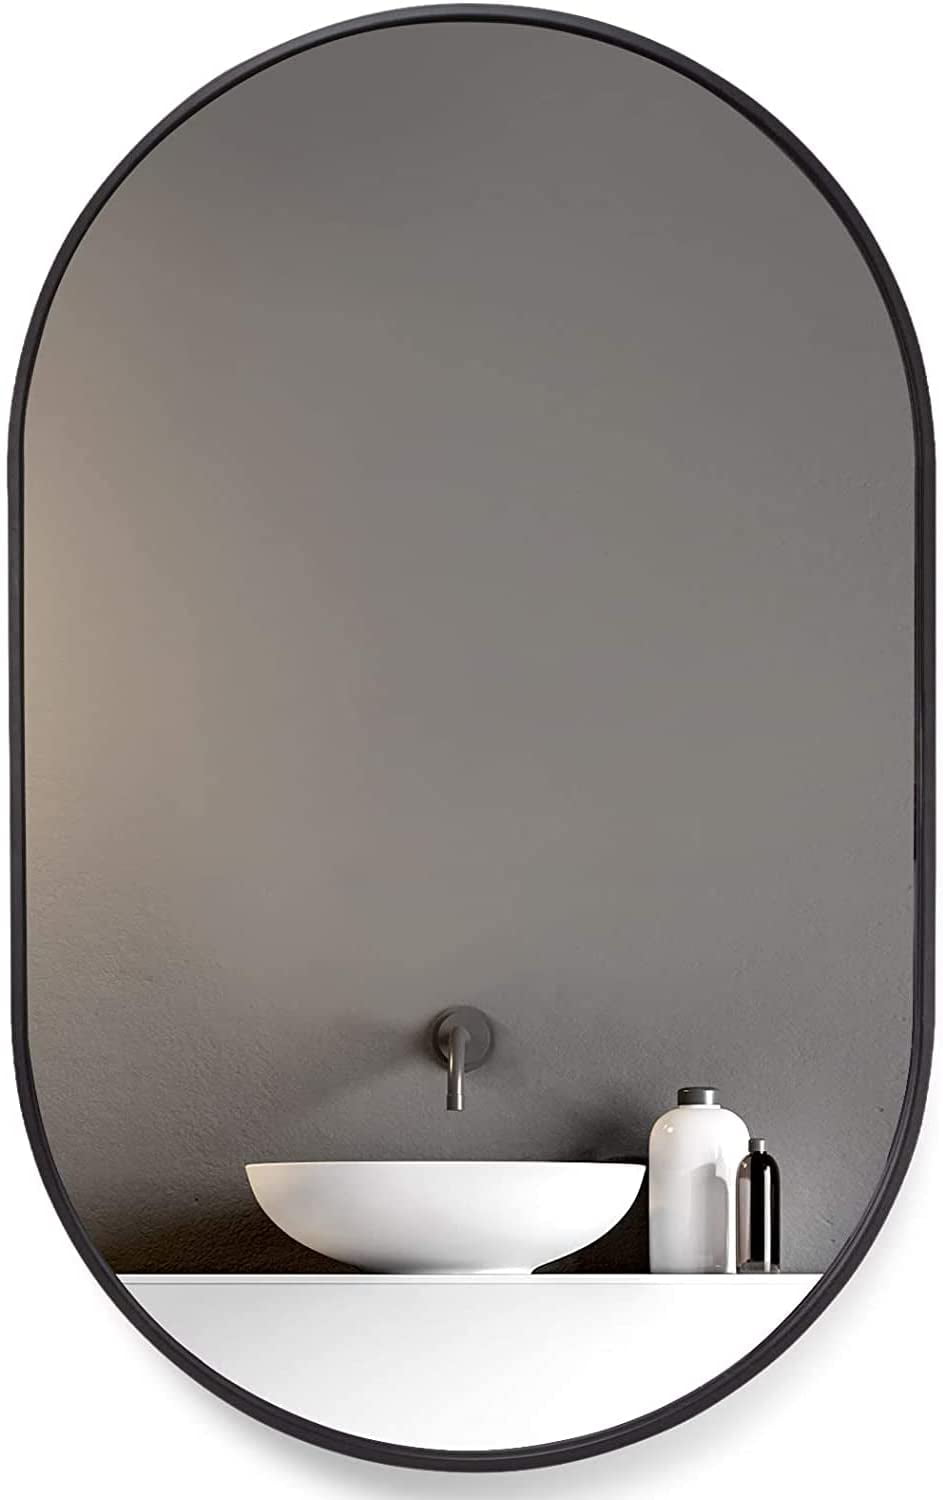 Bathroom Accessories Mirror Oval Mirror Full-Length Mirror Clothing Store Cloakroom Make-up Mirror Fitting Room Floor Mirror Fitting Mirror Wall-Mounted Mirror High 120cm